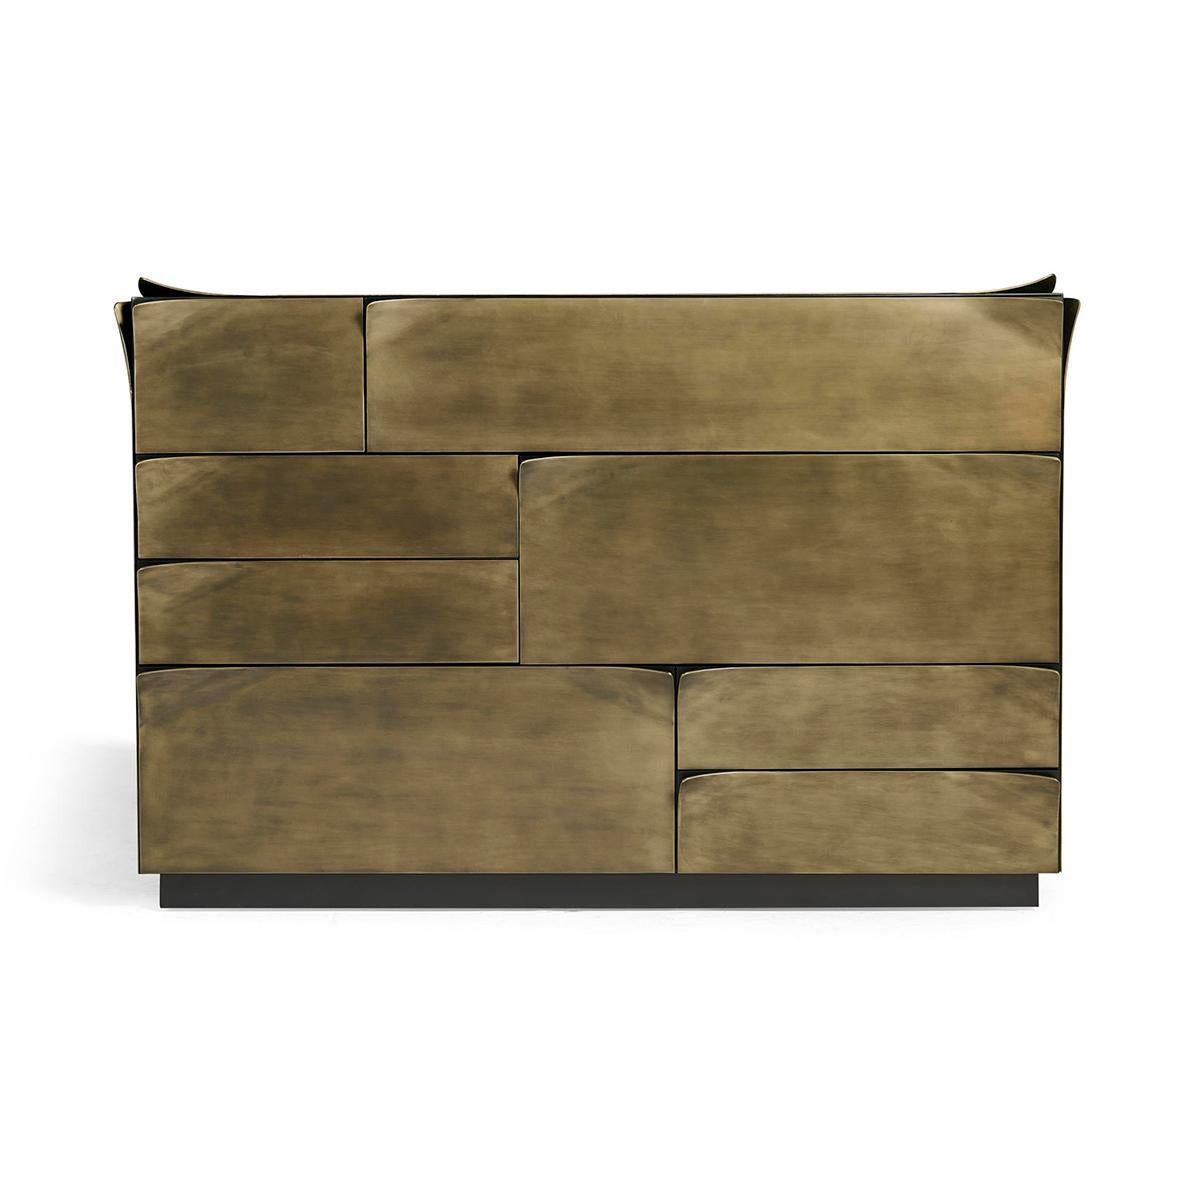 A stunning statement piece that brings a splash of glamour and sophistication to any room. With its sleek, contemporary design and luxurious gold finish, this dresser is not just a storage solution, but a centerpiece of decor.

The dresser's